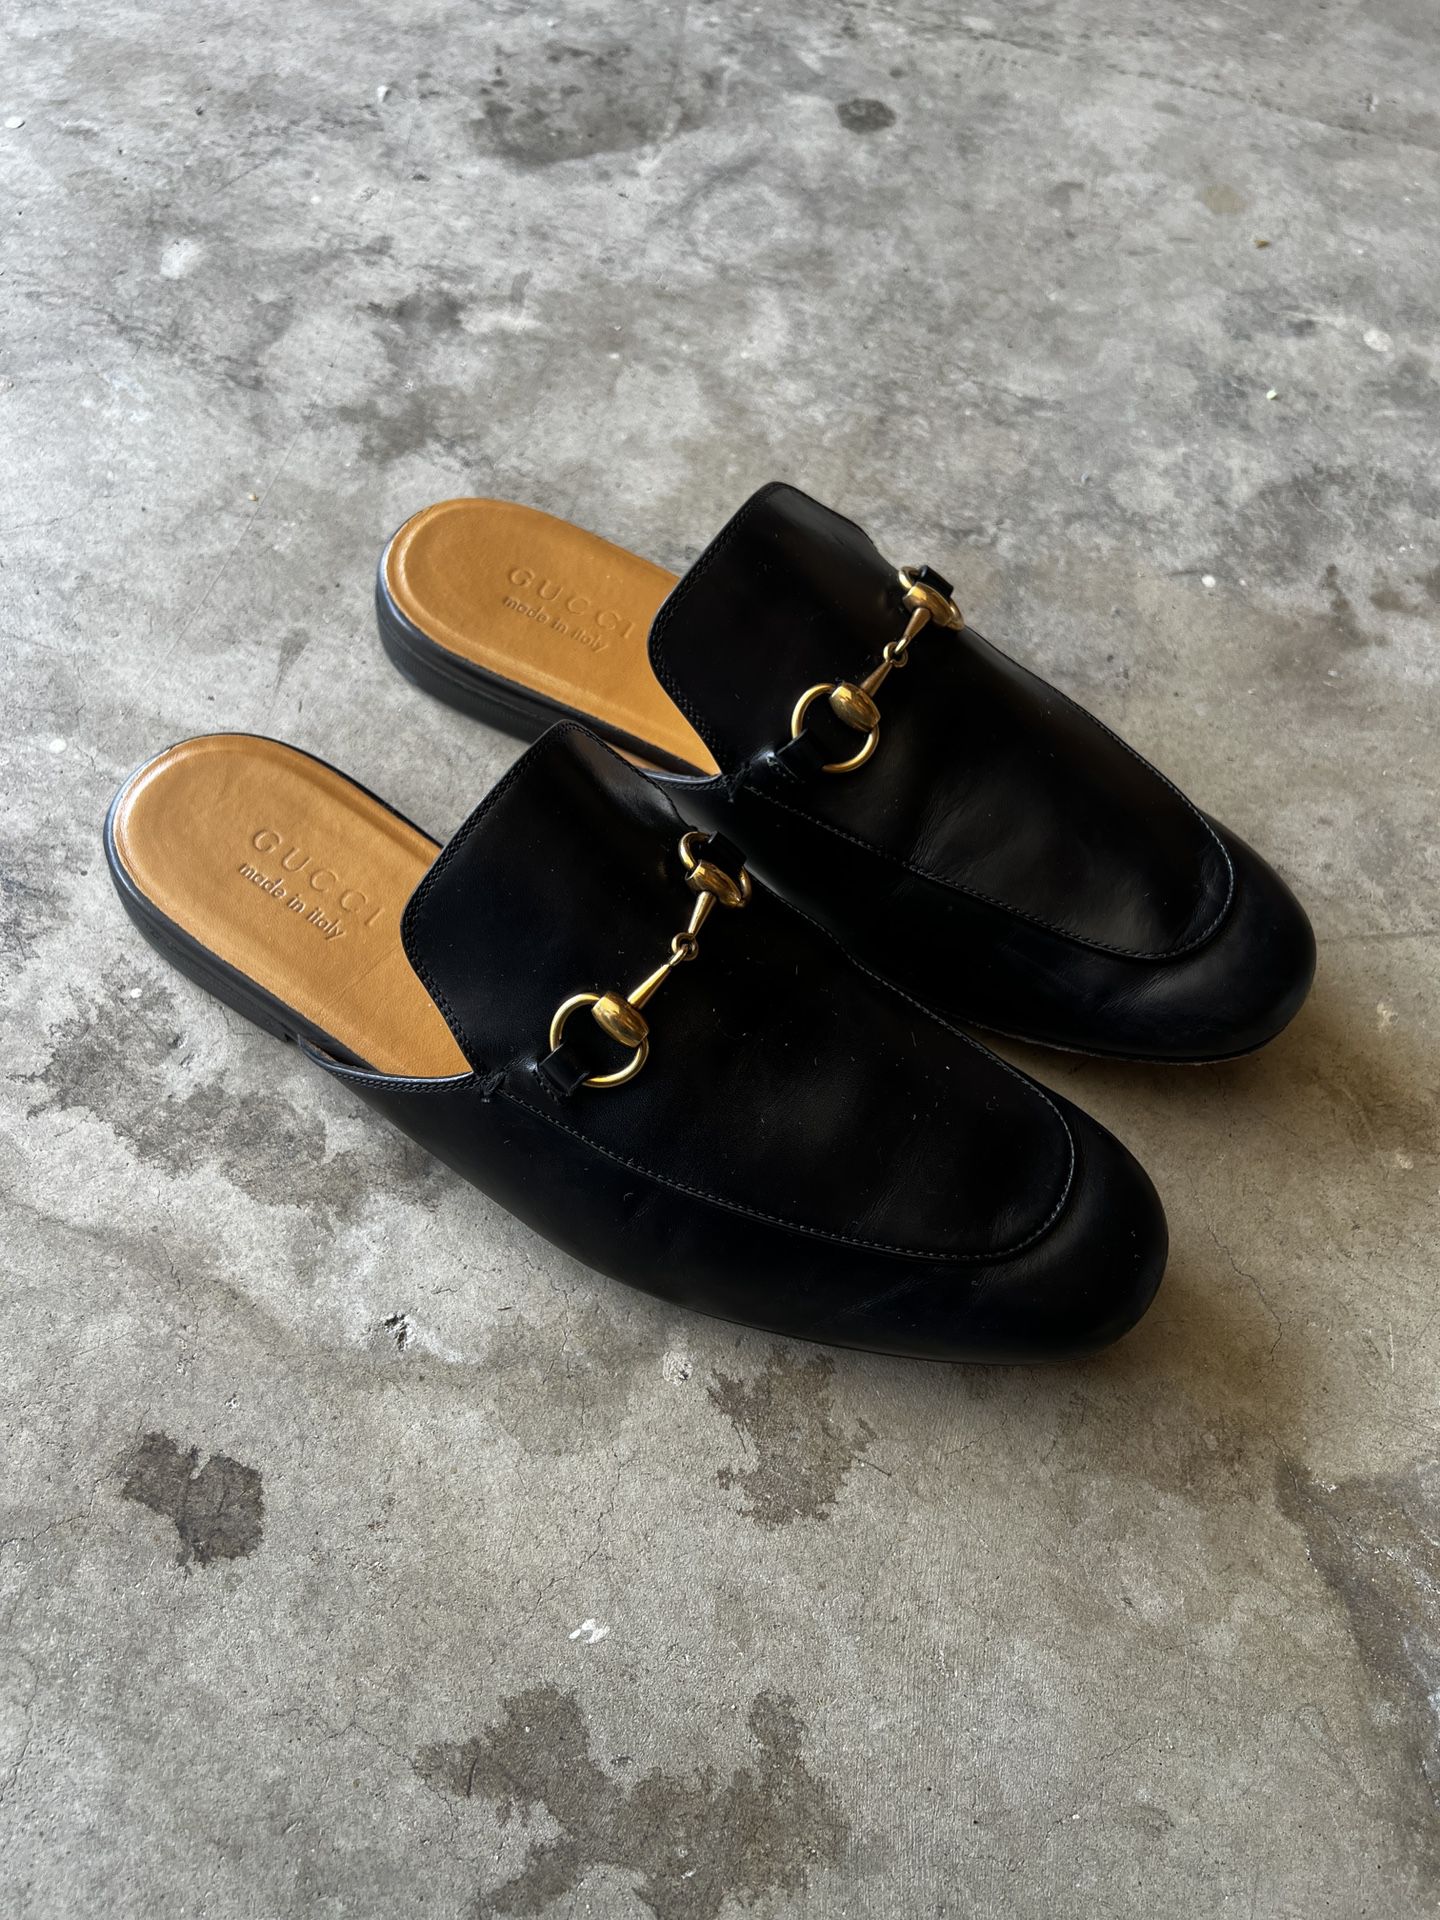 Gucci Leather Princetown Loafer Mule